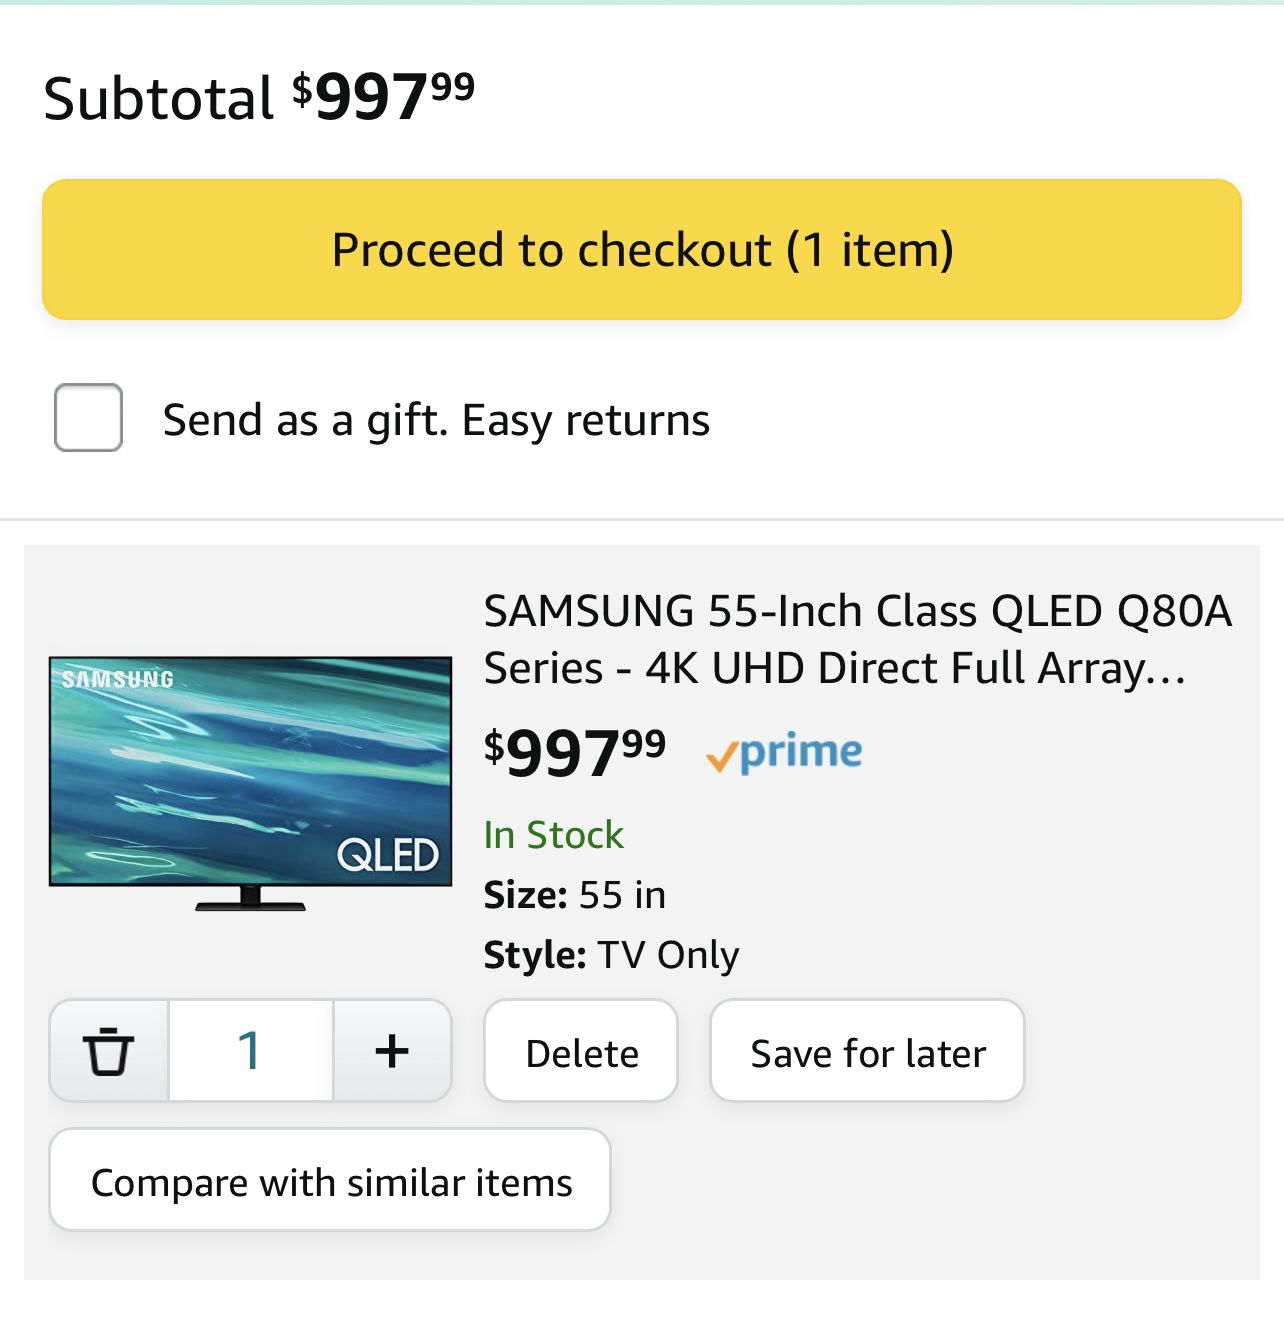 SAMSUNG 55-Inch Class QLED Q80A Series - 4K UHD Direct Full Array Quantum HDR 12x Smart TV with Alexa Built-in and 6 Speaker Object Tracking Sound